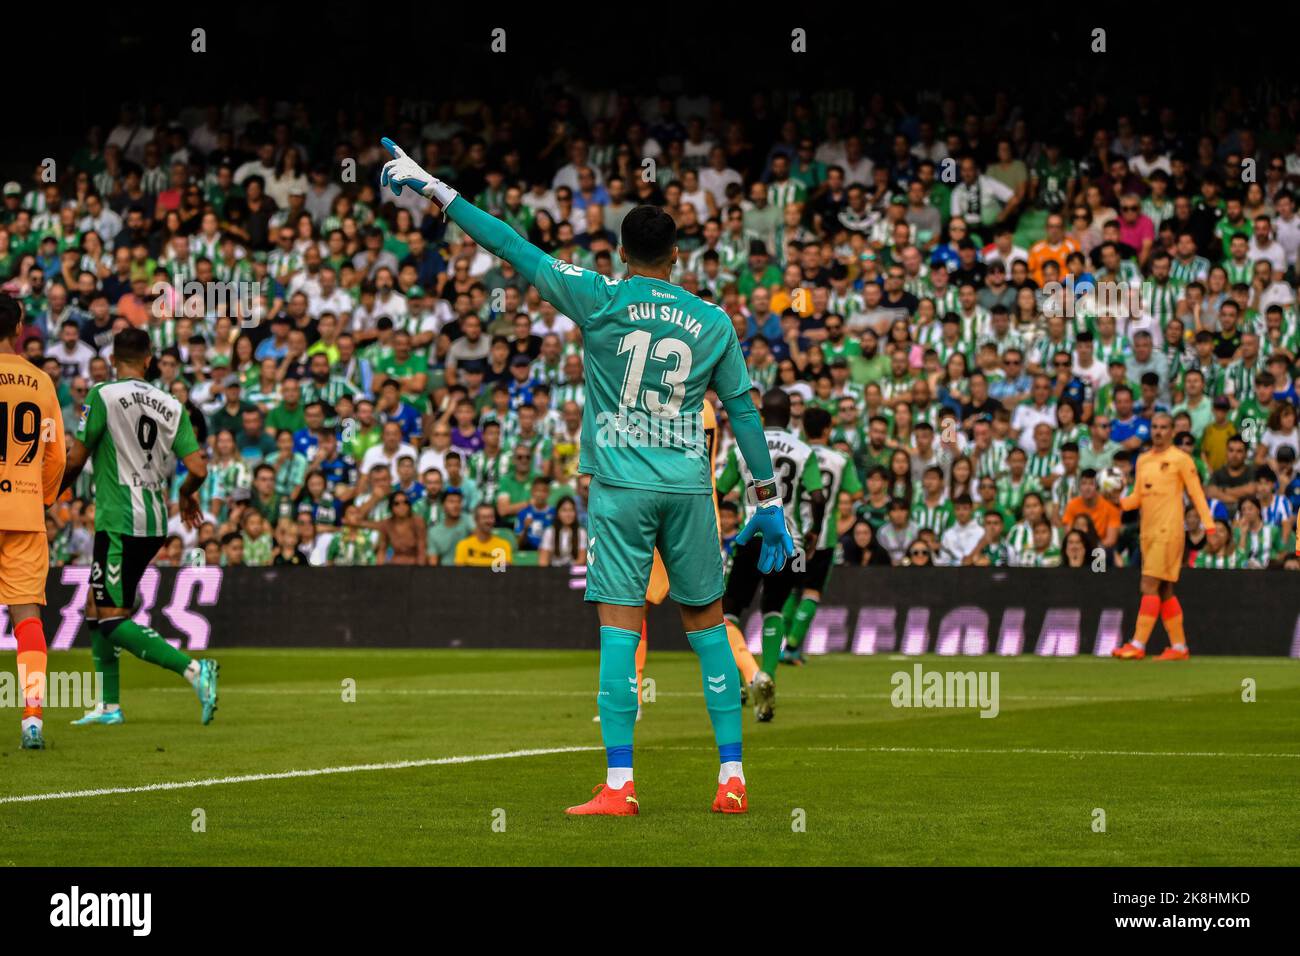 SEVILLA, SPAIN - OCTOBER 23: Rui Silva of Real Betis Balompie during the match between Real Betis Balompie and Atletico de Madrid CF of La Liga Santander on August 27, 2022 at Mestalla in Valencia, Spain. (Photo by Samuel Carreño/PxImages) Stock Photo